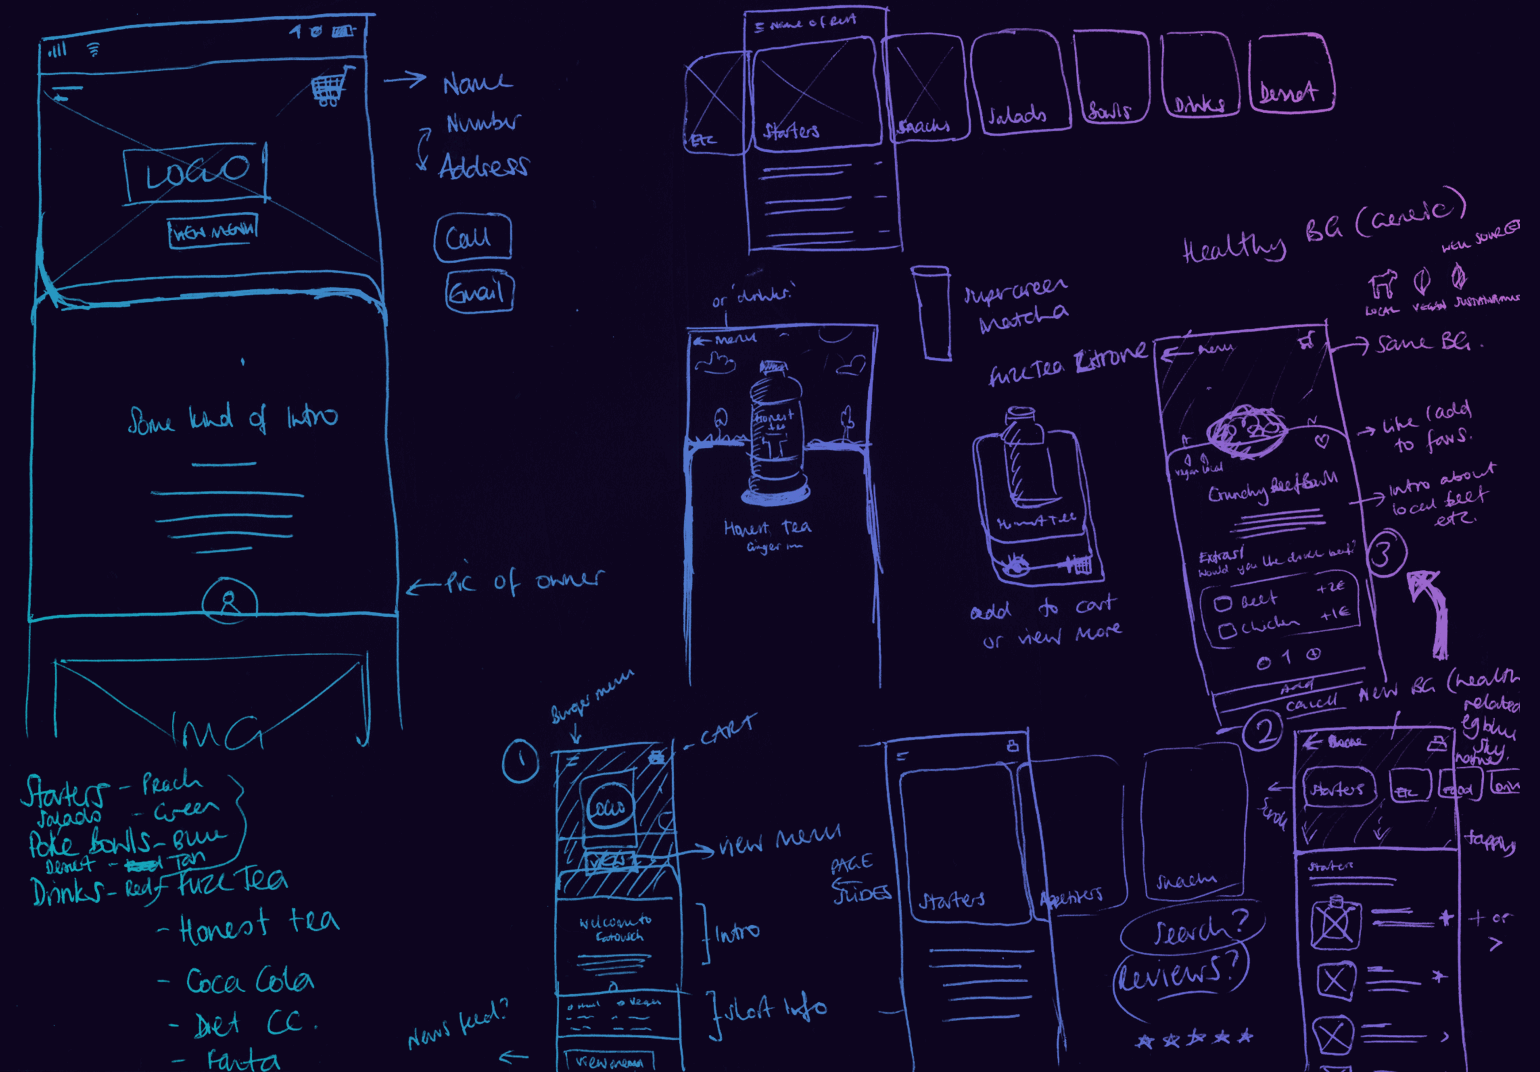 Rough sketches of an early concept and app ideas